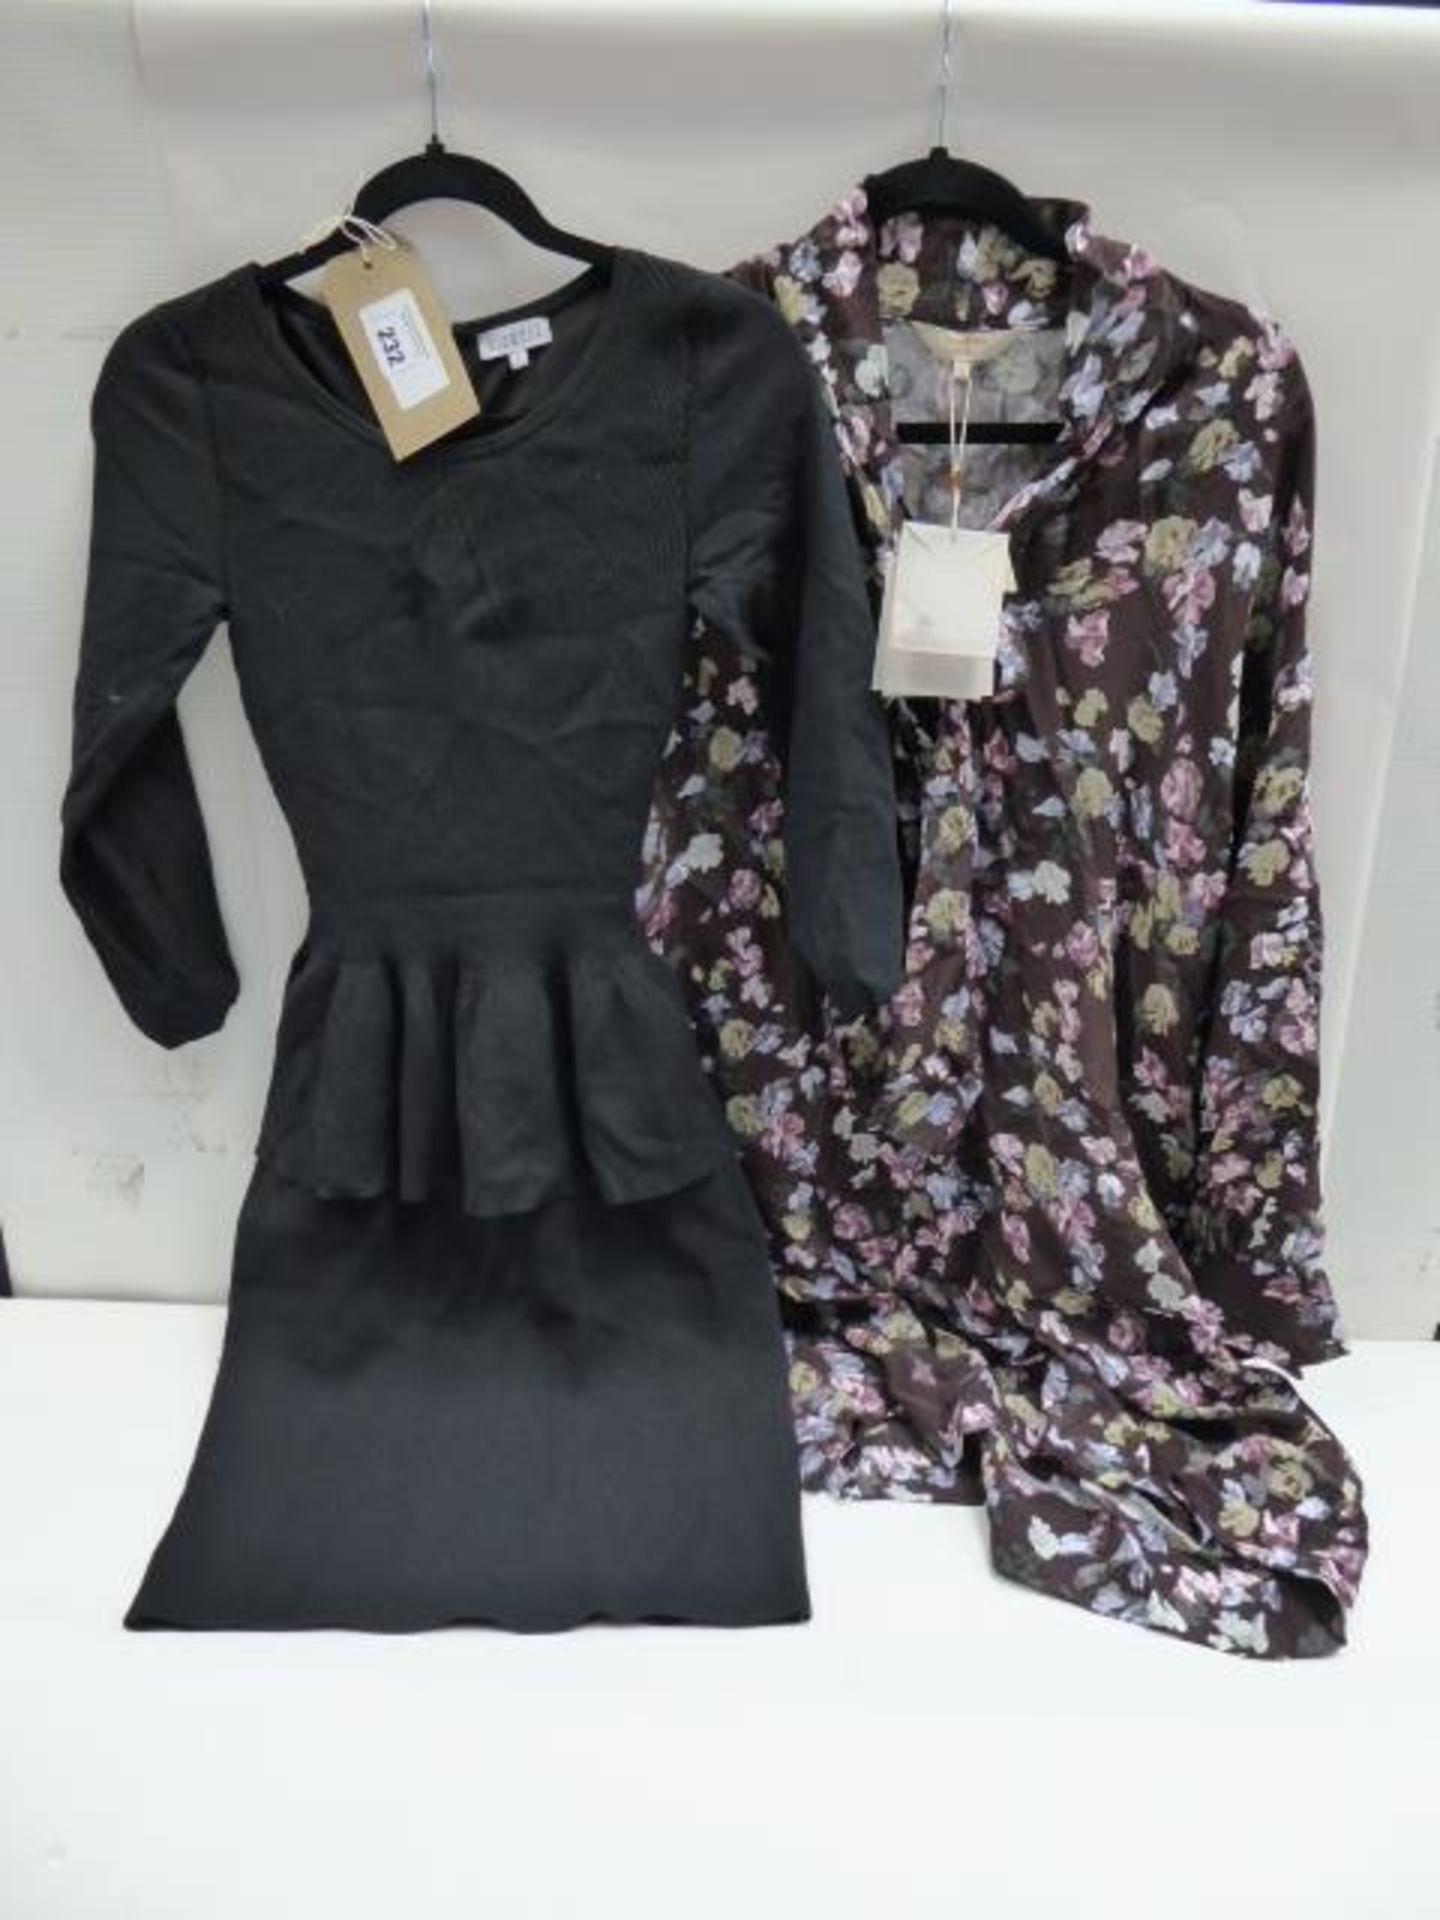 Claudie Pierlot black dress size 1 (used) and Modern Rarity floral dress size 8